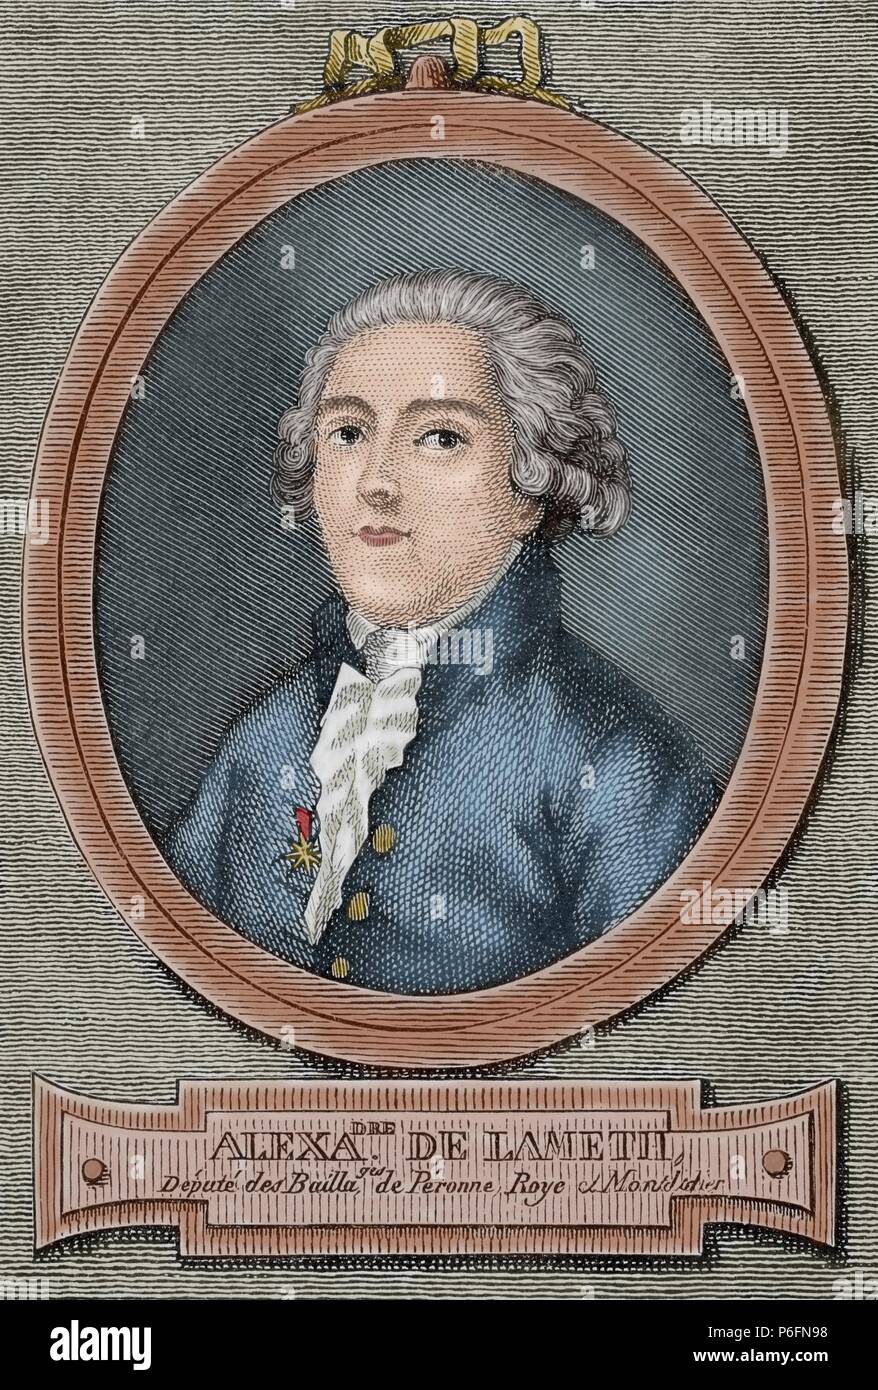 Alexandre de Lameth (1760-1829). French soldier and politician. Engraving in History of France, 1883. Colored. Stock Photo